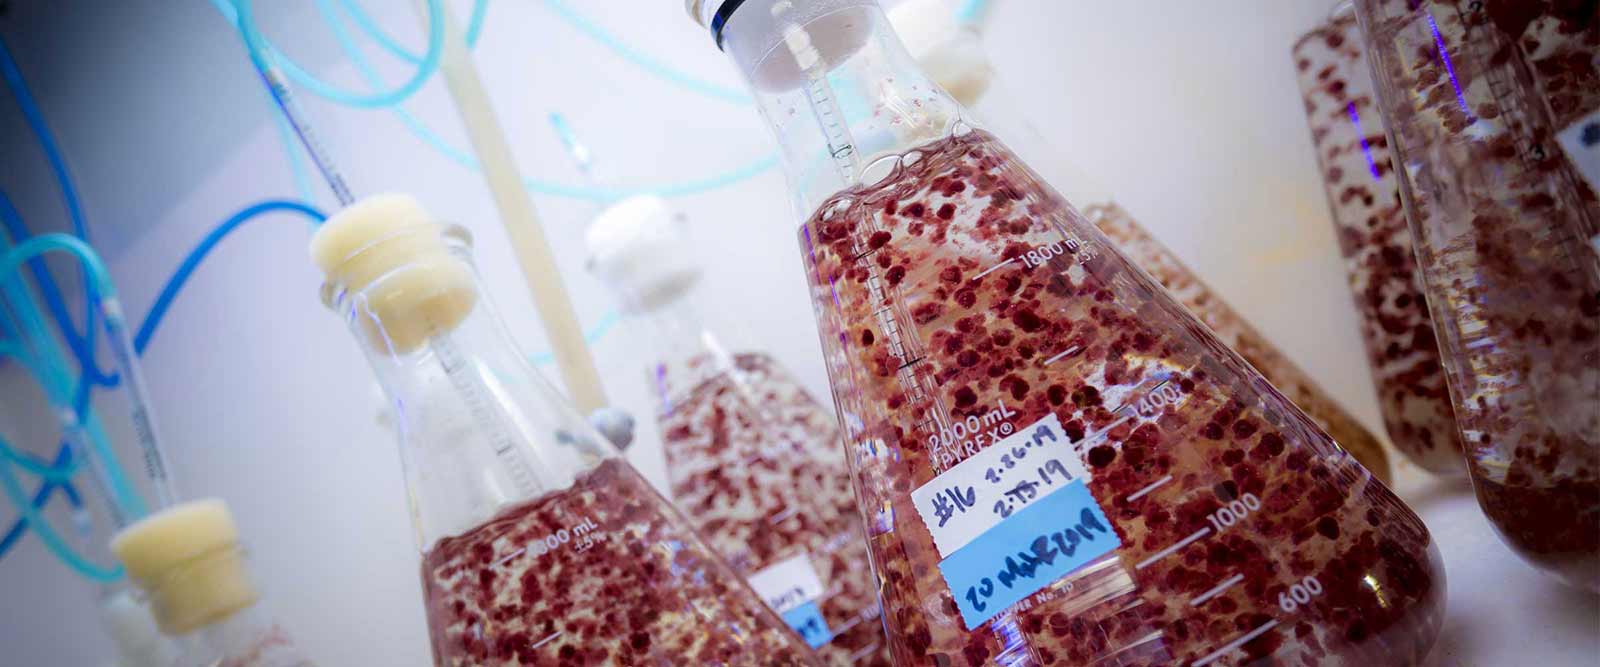 Photo of seaweed sustainable food research flasks in lab.